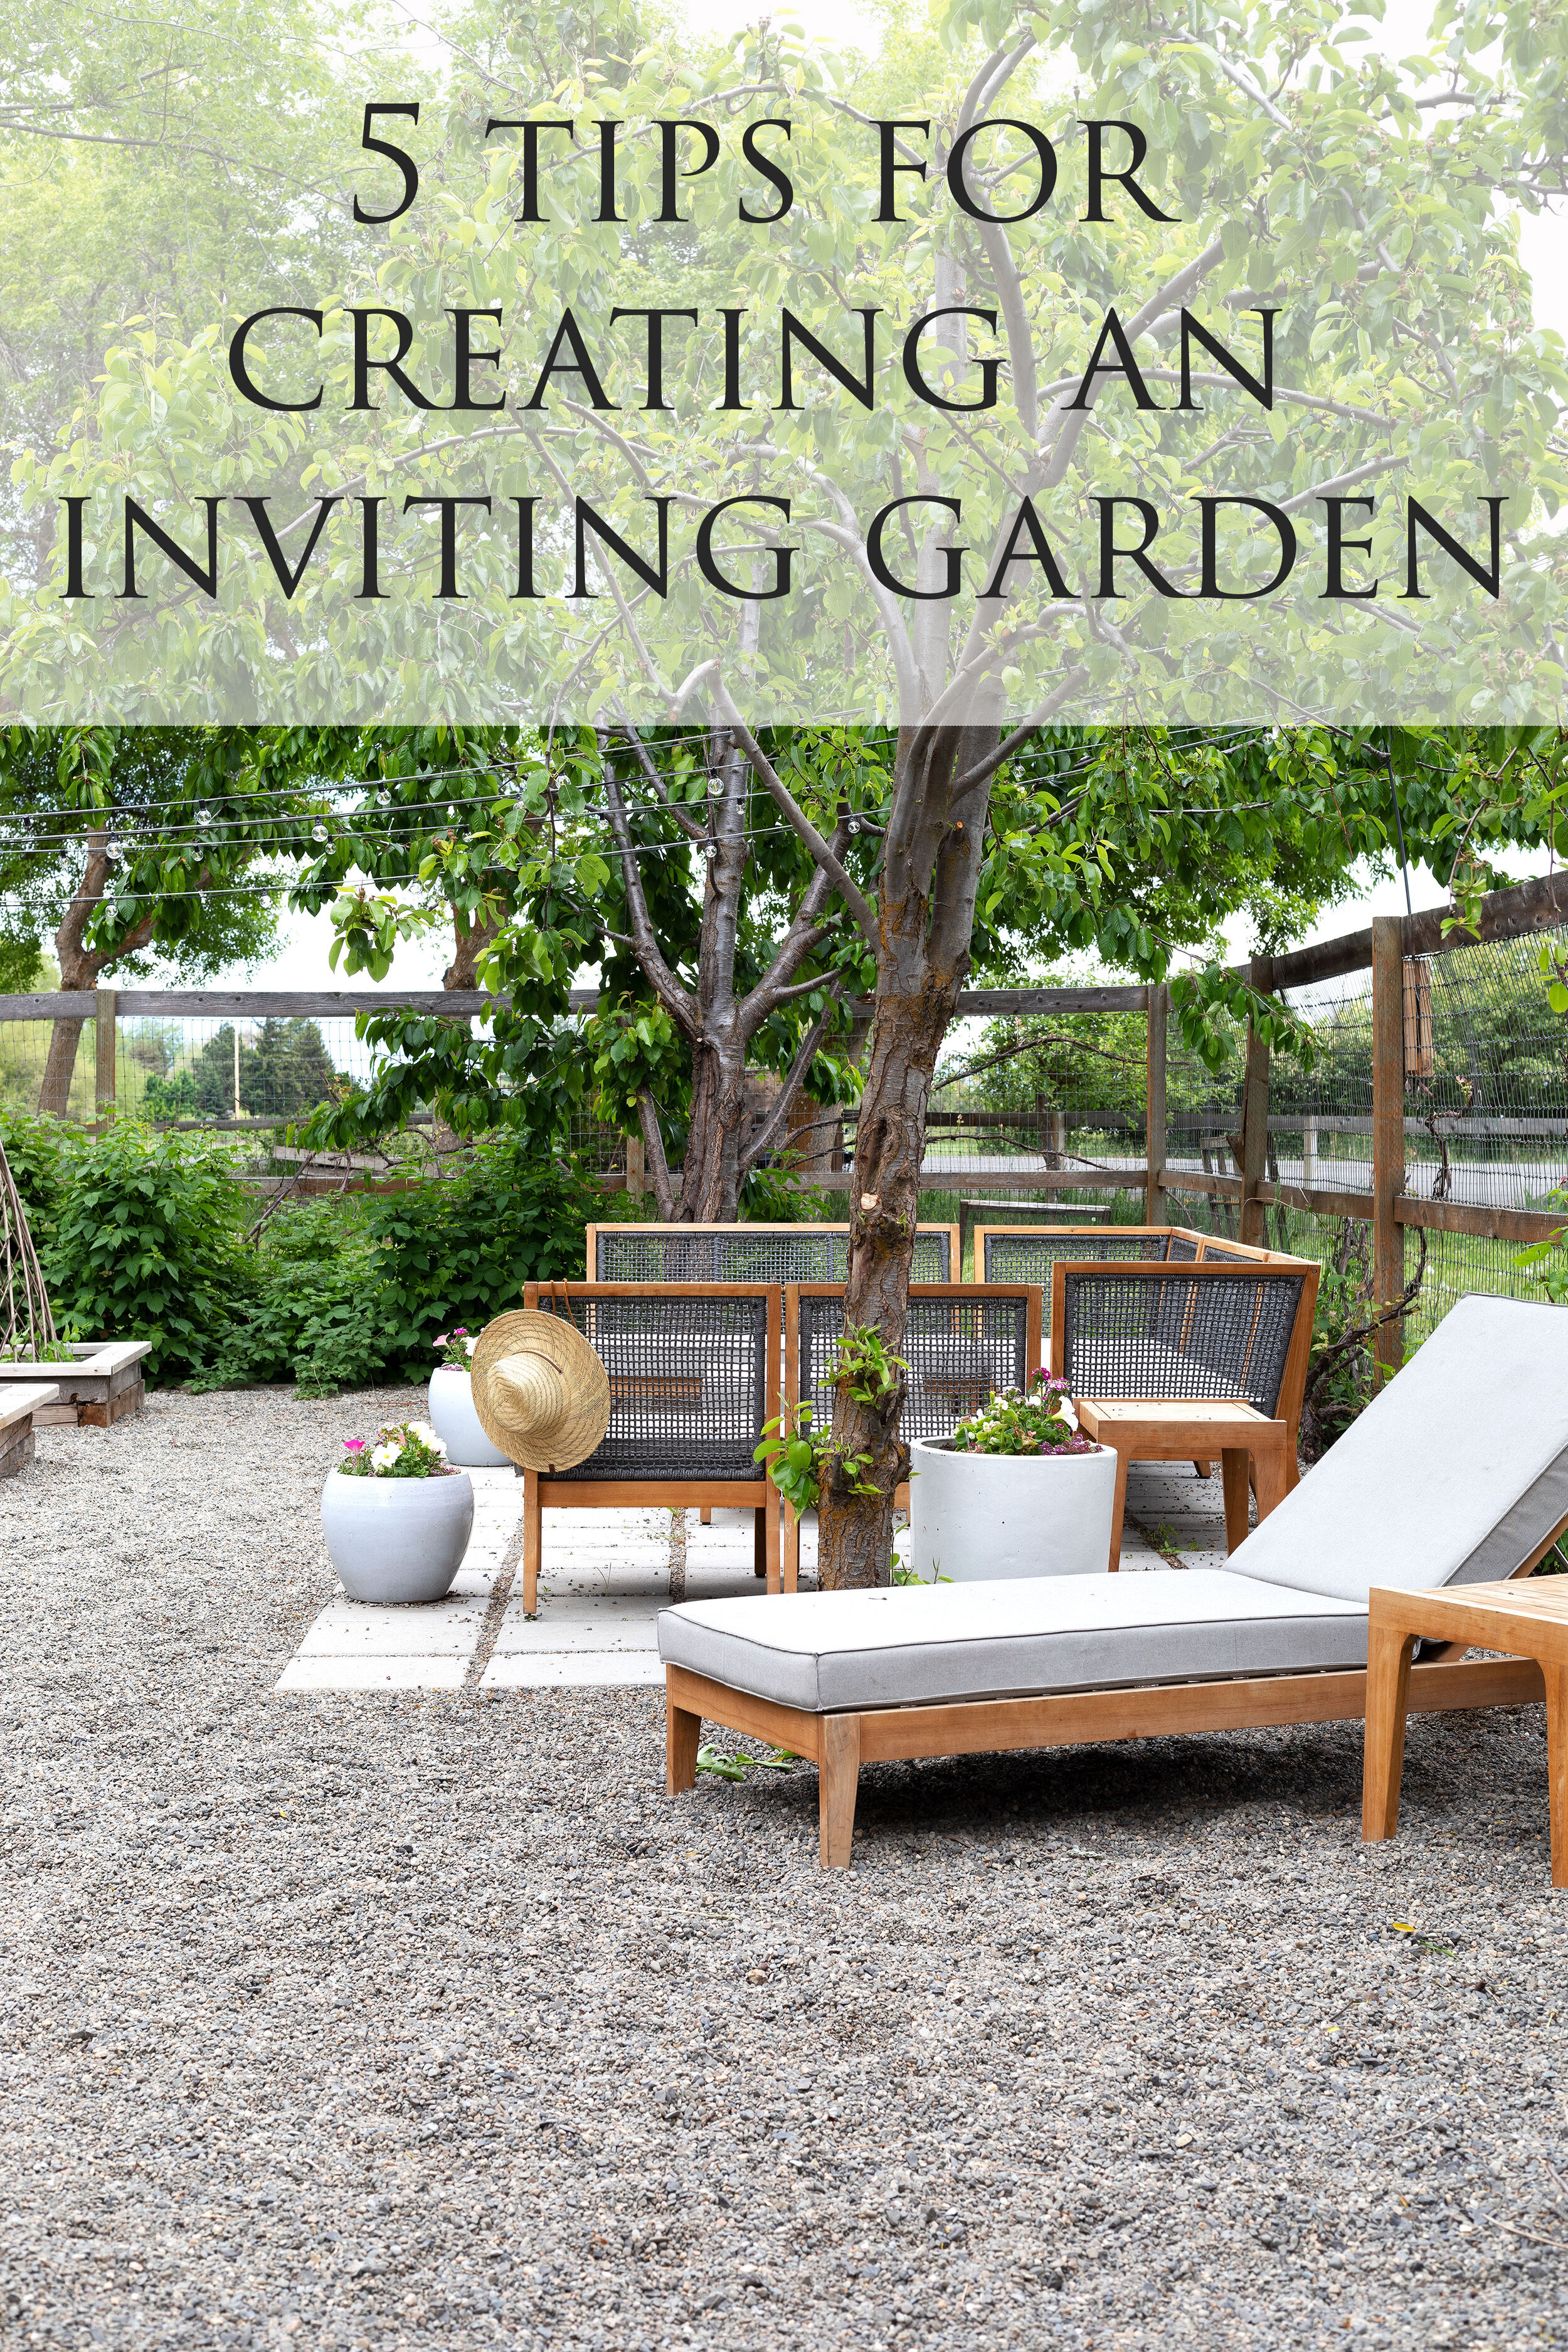 Decorating Outdoor Spaces? Start With These 5 Tips